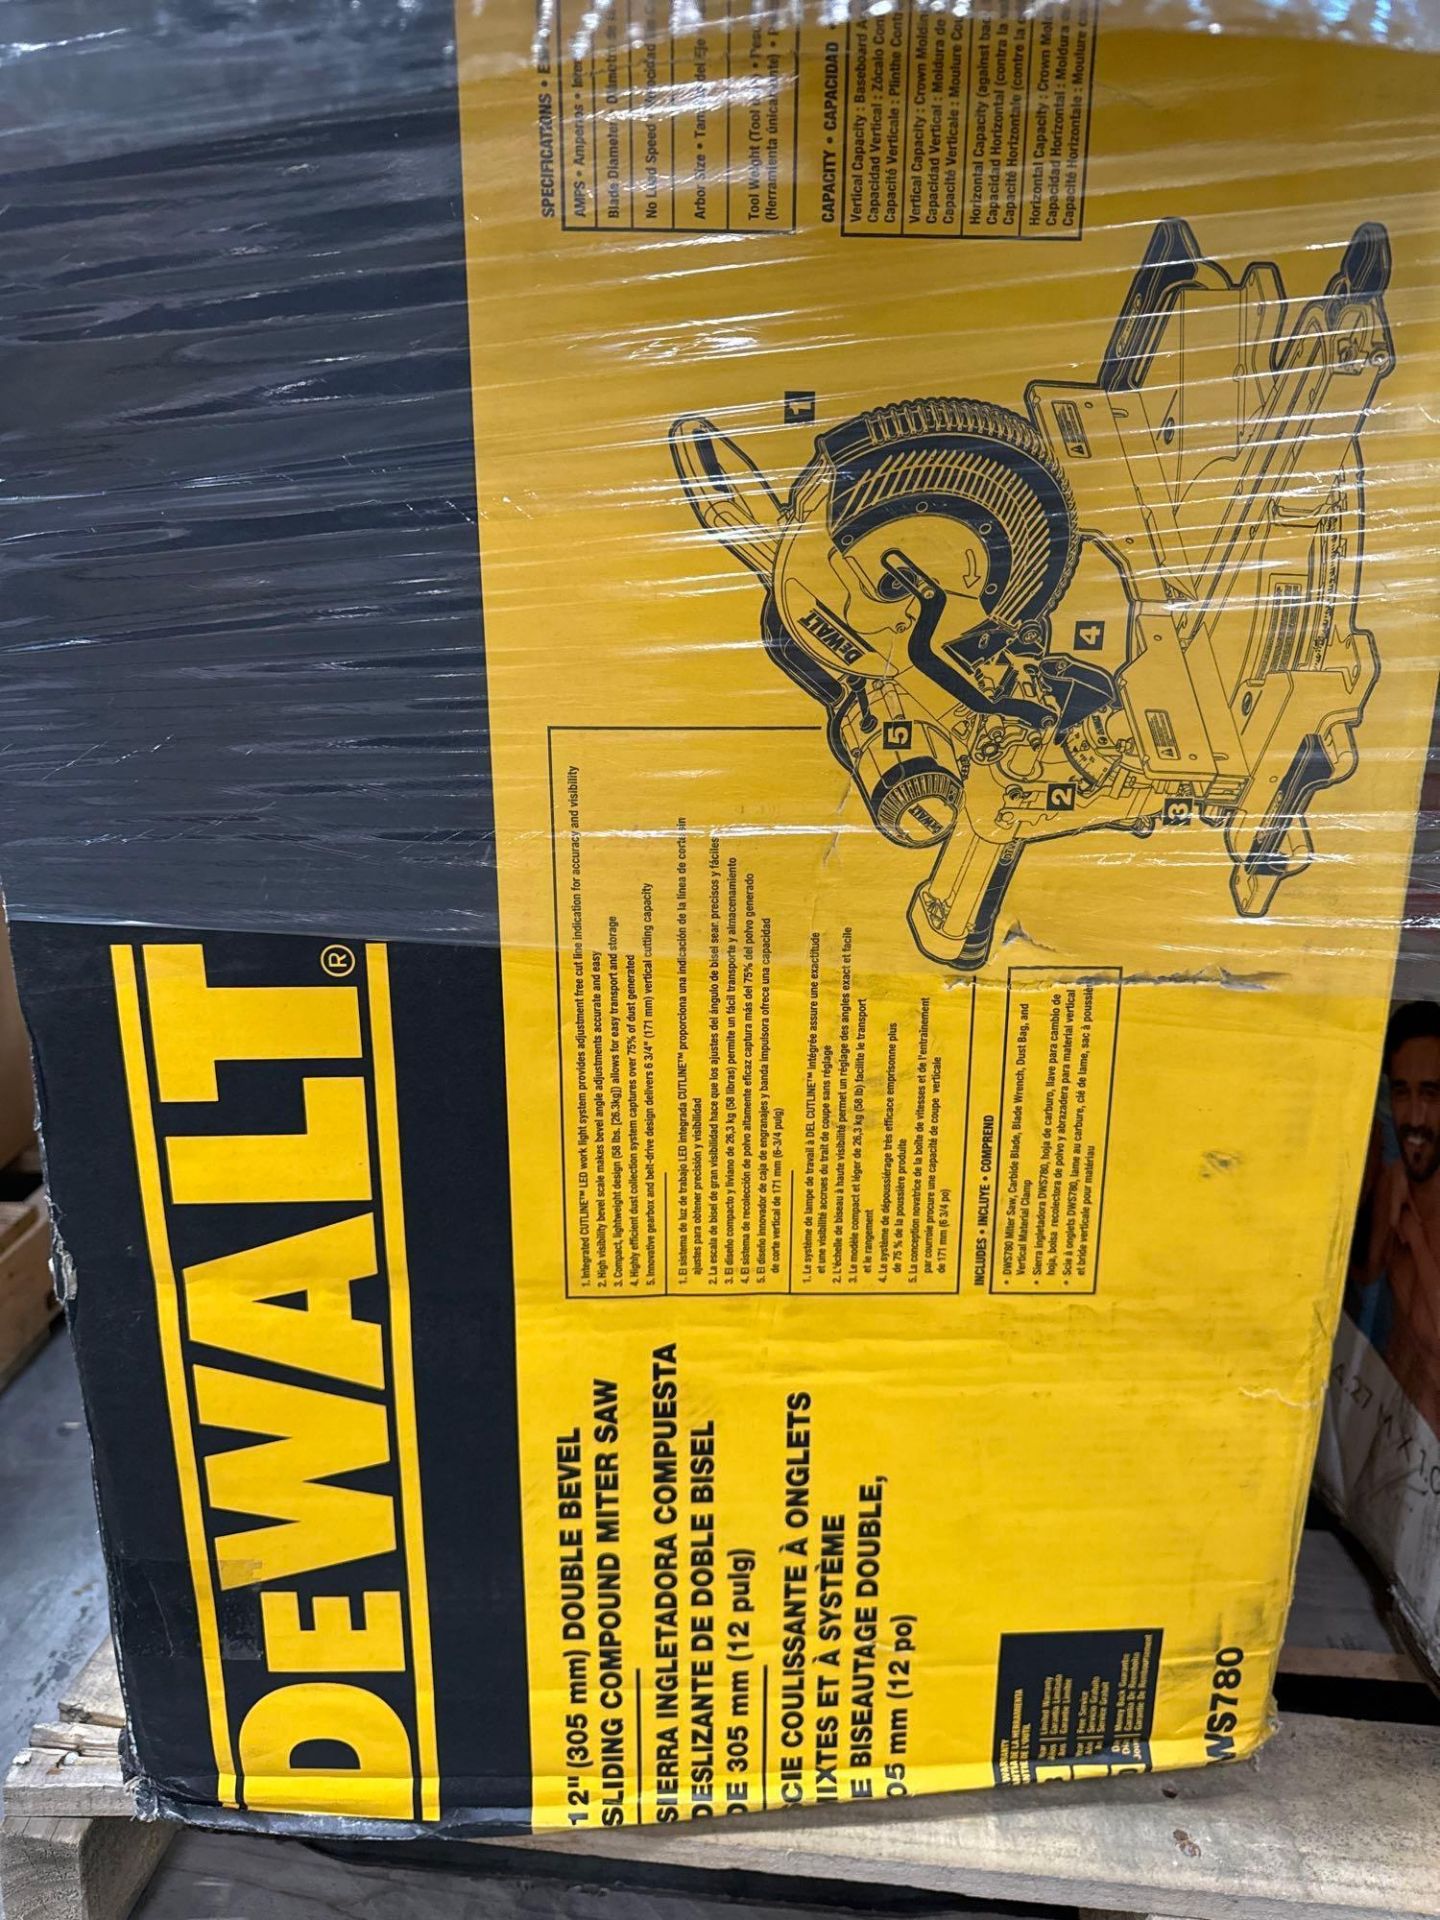 DeWalt double bevel compound miter saw gas shock absorber clean mattress swimming pool wheels and